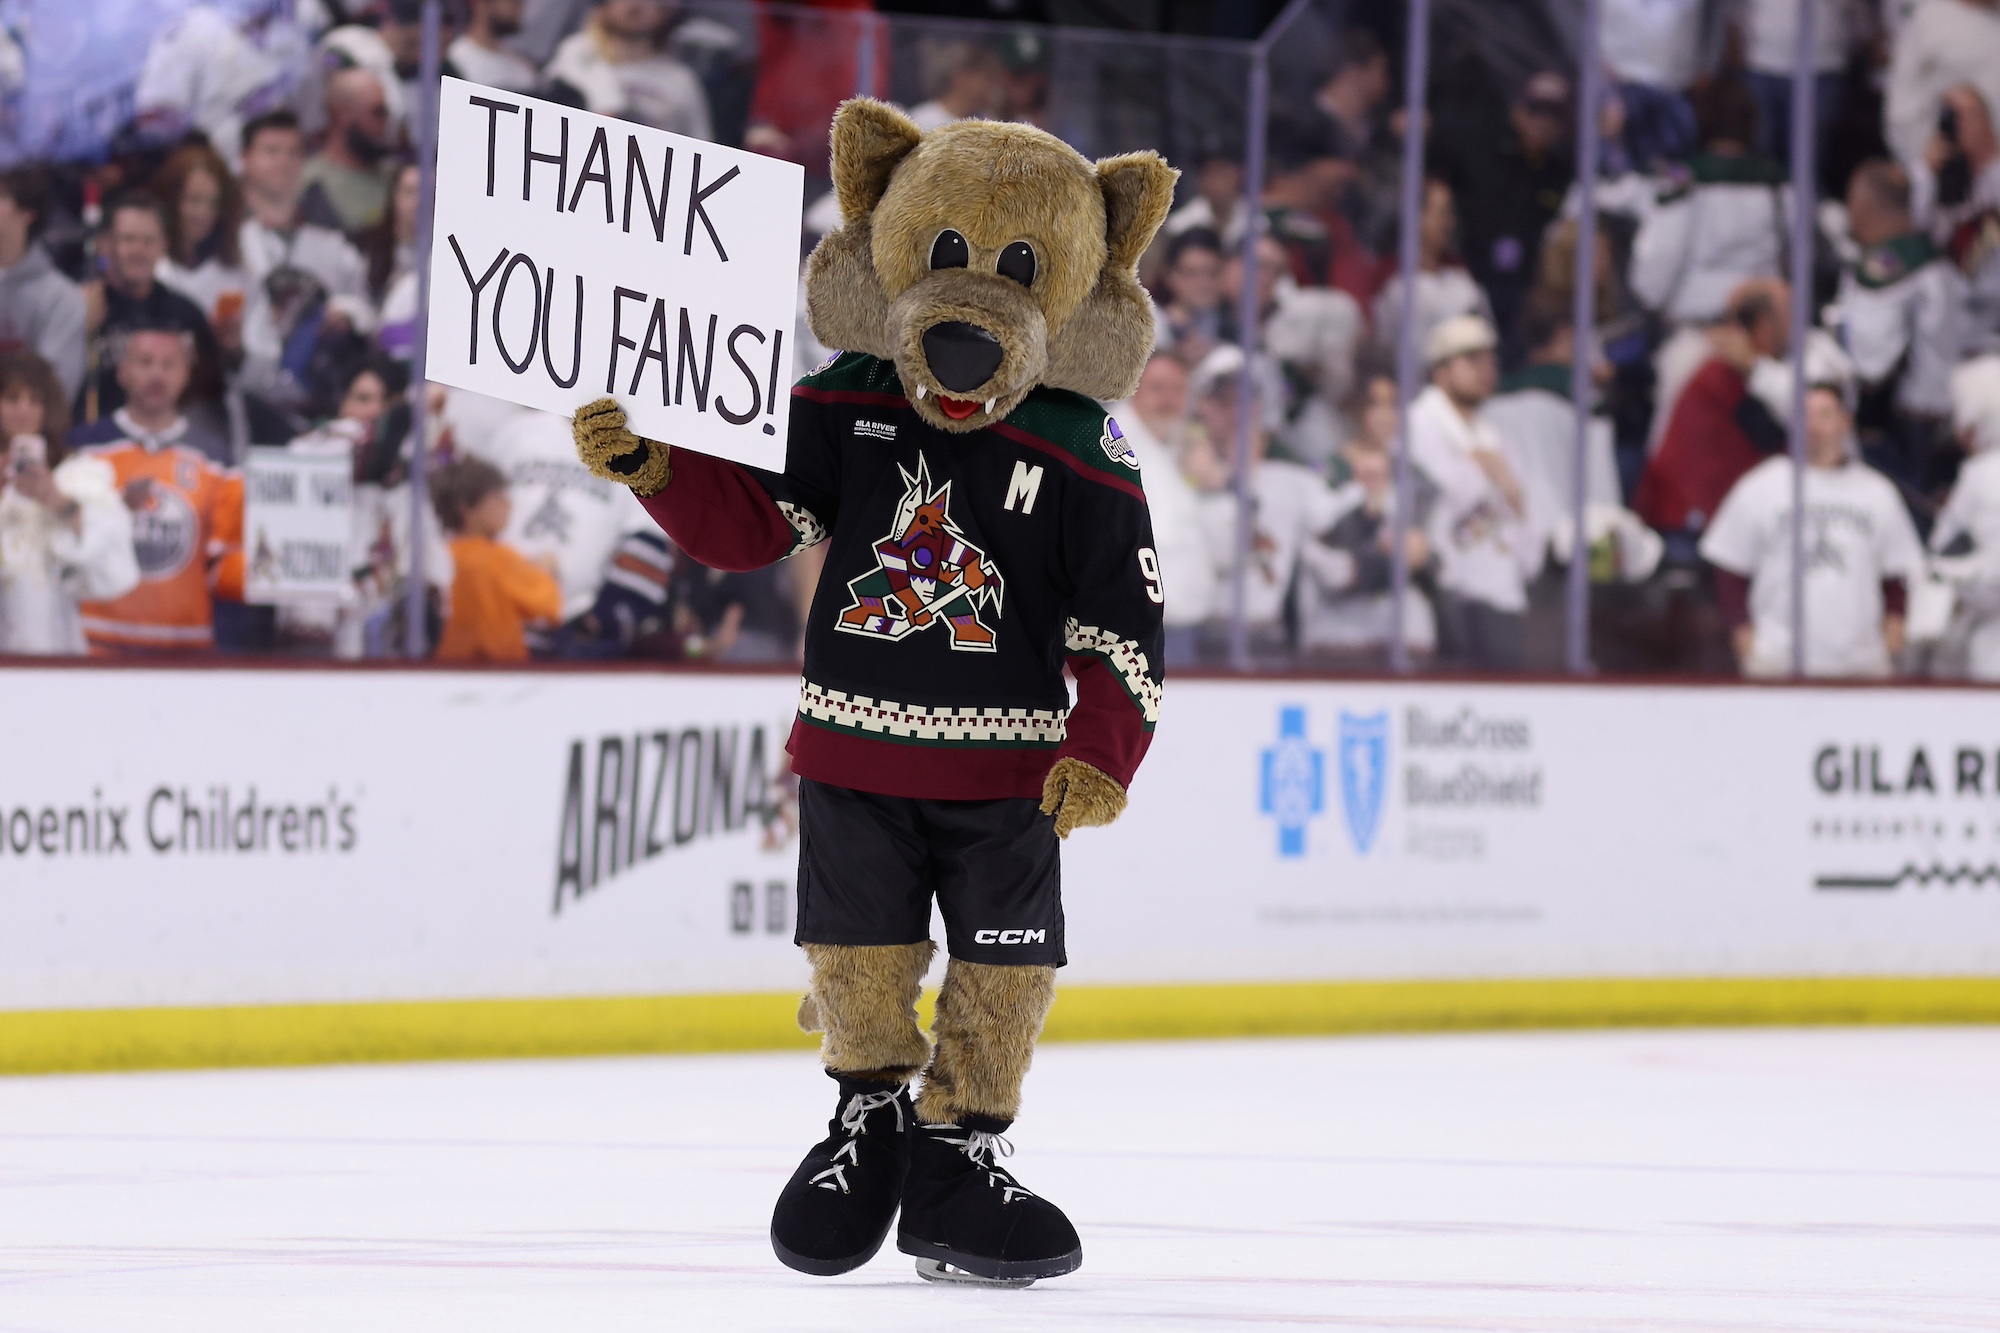 TEMPE, ARIZONA - APRIL 17: The Arizona Coyotes mascot, "Howler" holds up a sign reading "thank you fans" following the NHL game against the Edmonton Oilers at Mullett Arena on April 17, 2024 in Tempe, Arizona. Tonight's game likely marks the end of 28 years for the franchise, playing in the NHL's smallest arena, with an anticipated move to Utah with the team's expected sale to the NBA's Utah Jazz owner Ryan Smith. (Photo by Christian Petersen/Getty Images)